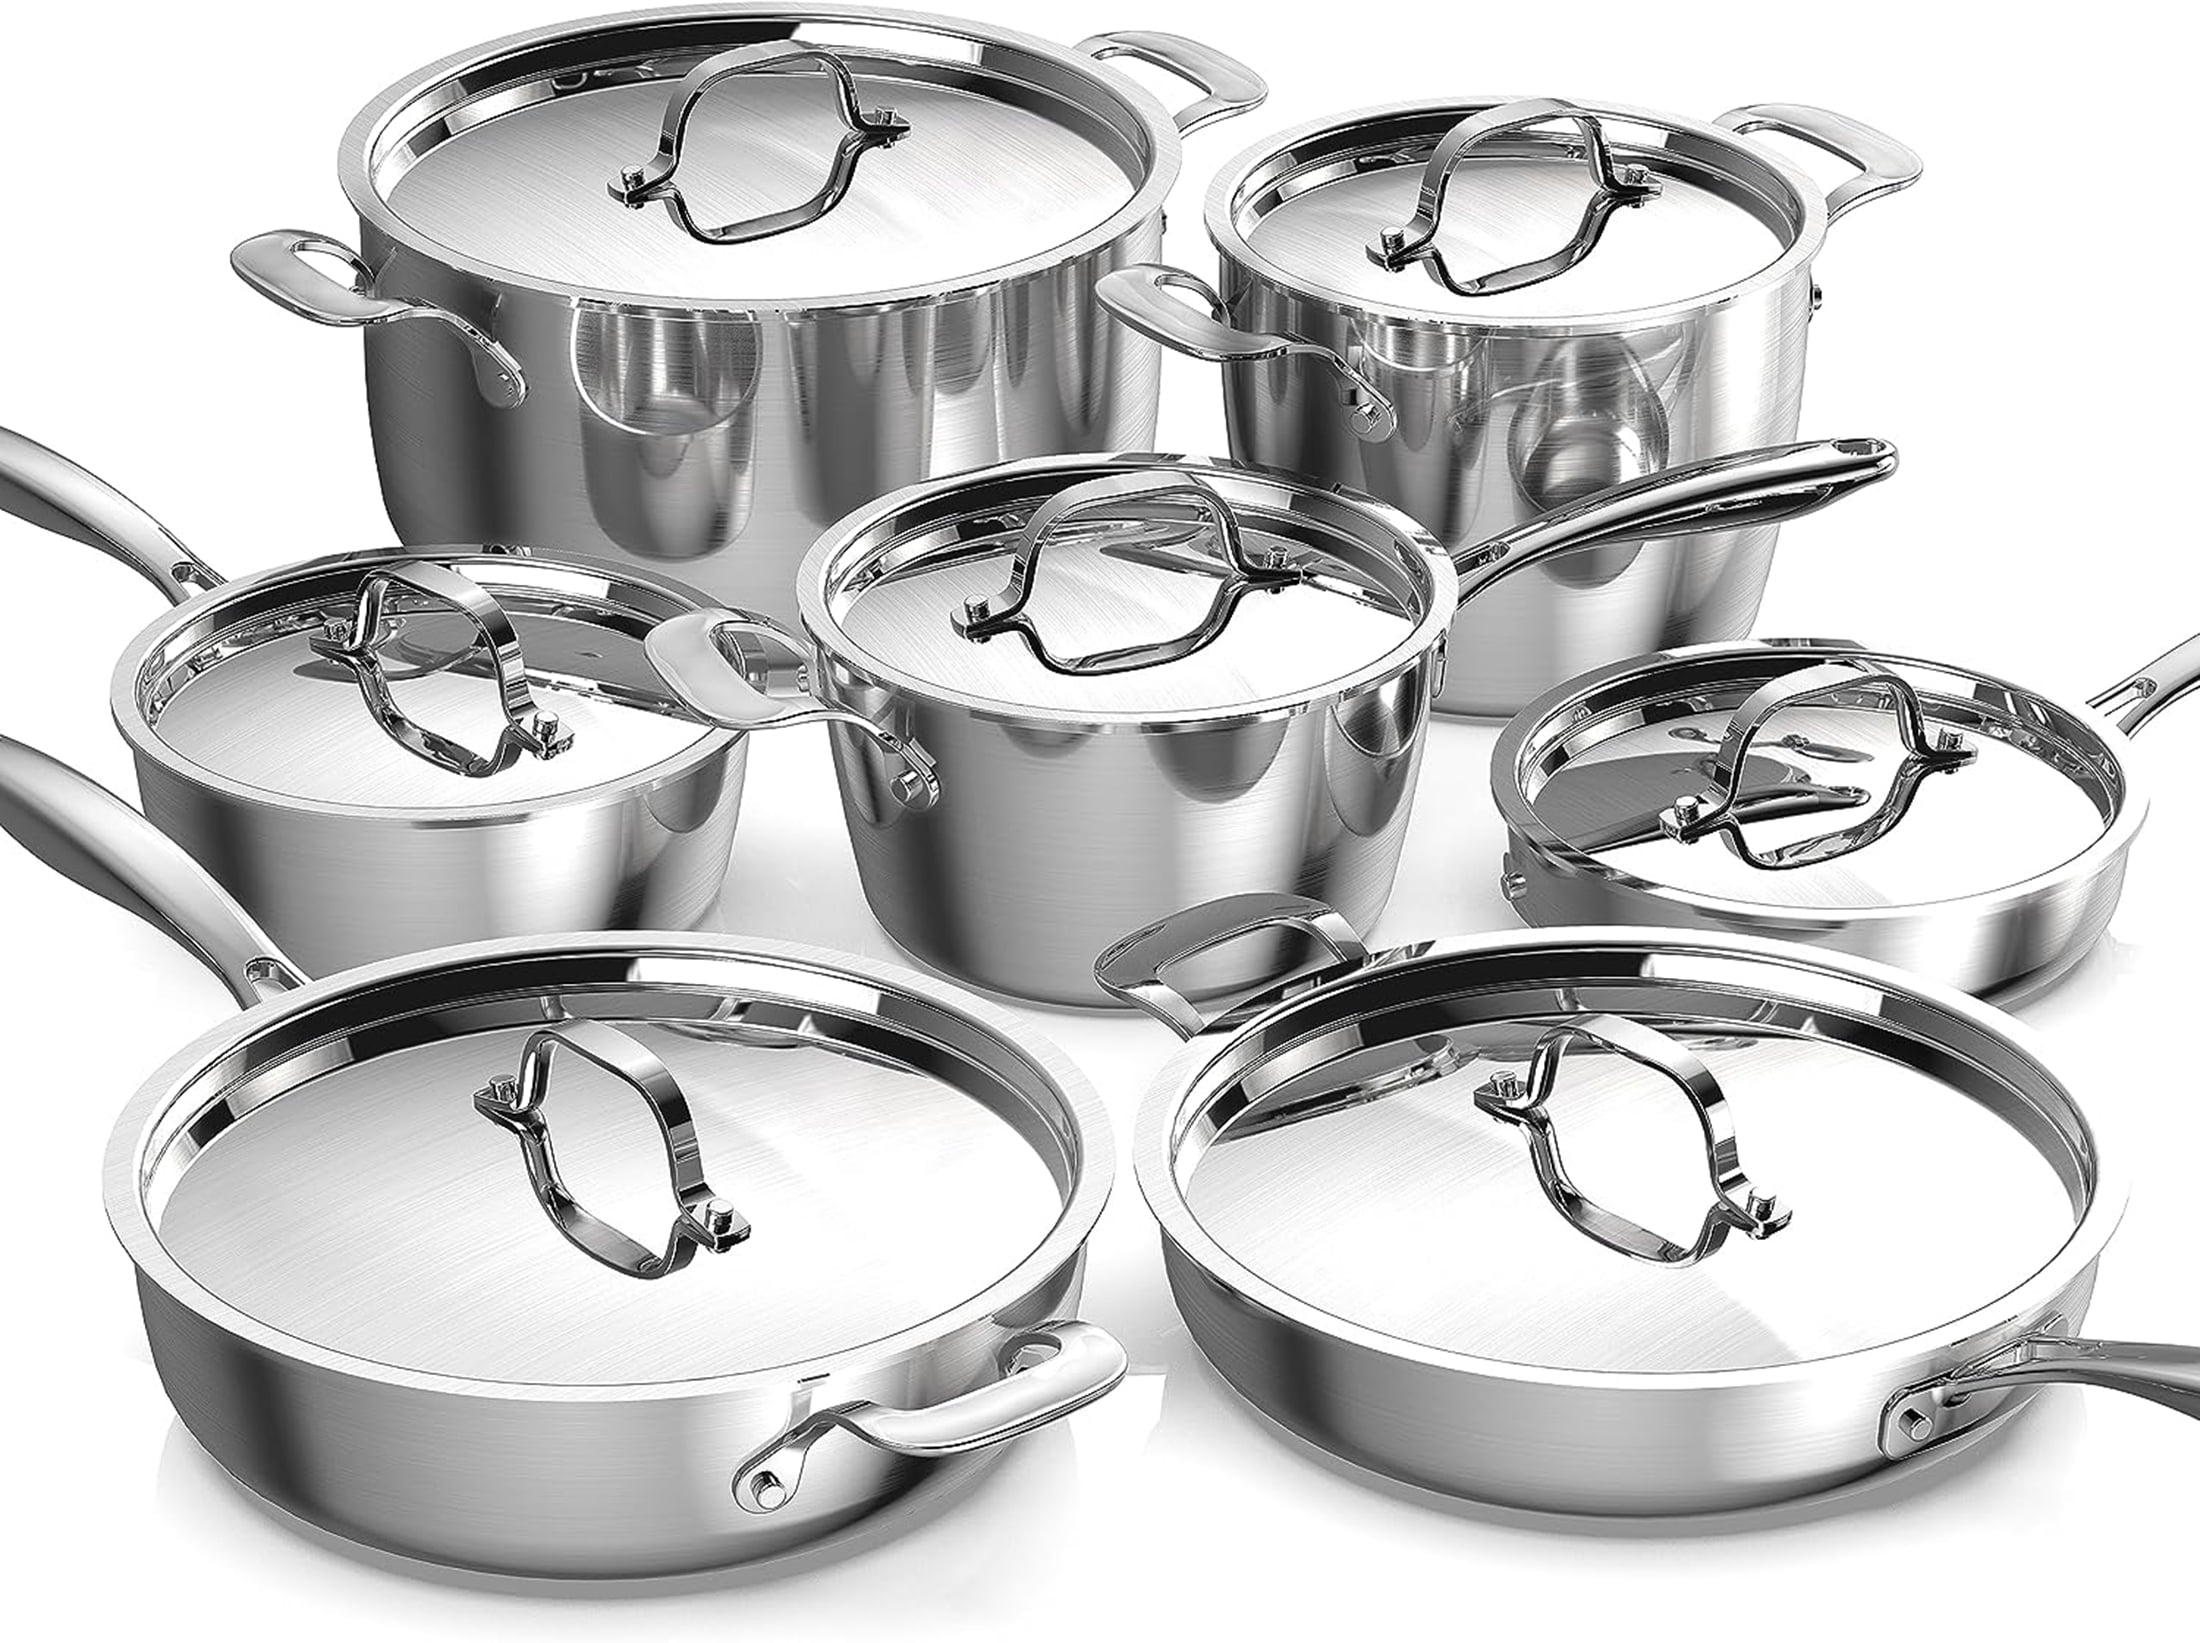 NuWave Professional 9 Pieces Induction Cookware Set, Heavy-Duty Tri-Ply  3.1mm Thickness Stainless Steel Cookware Set, Stay-Cool Handles and Works  on All Cooktops, Pan 